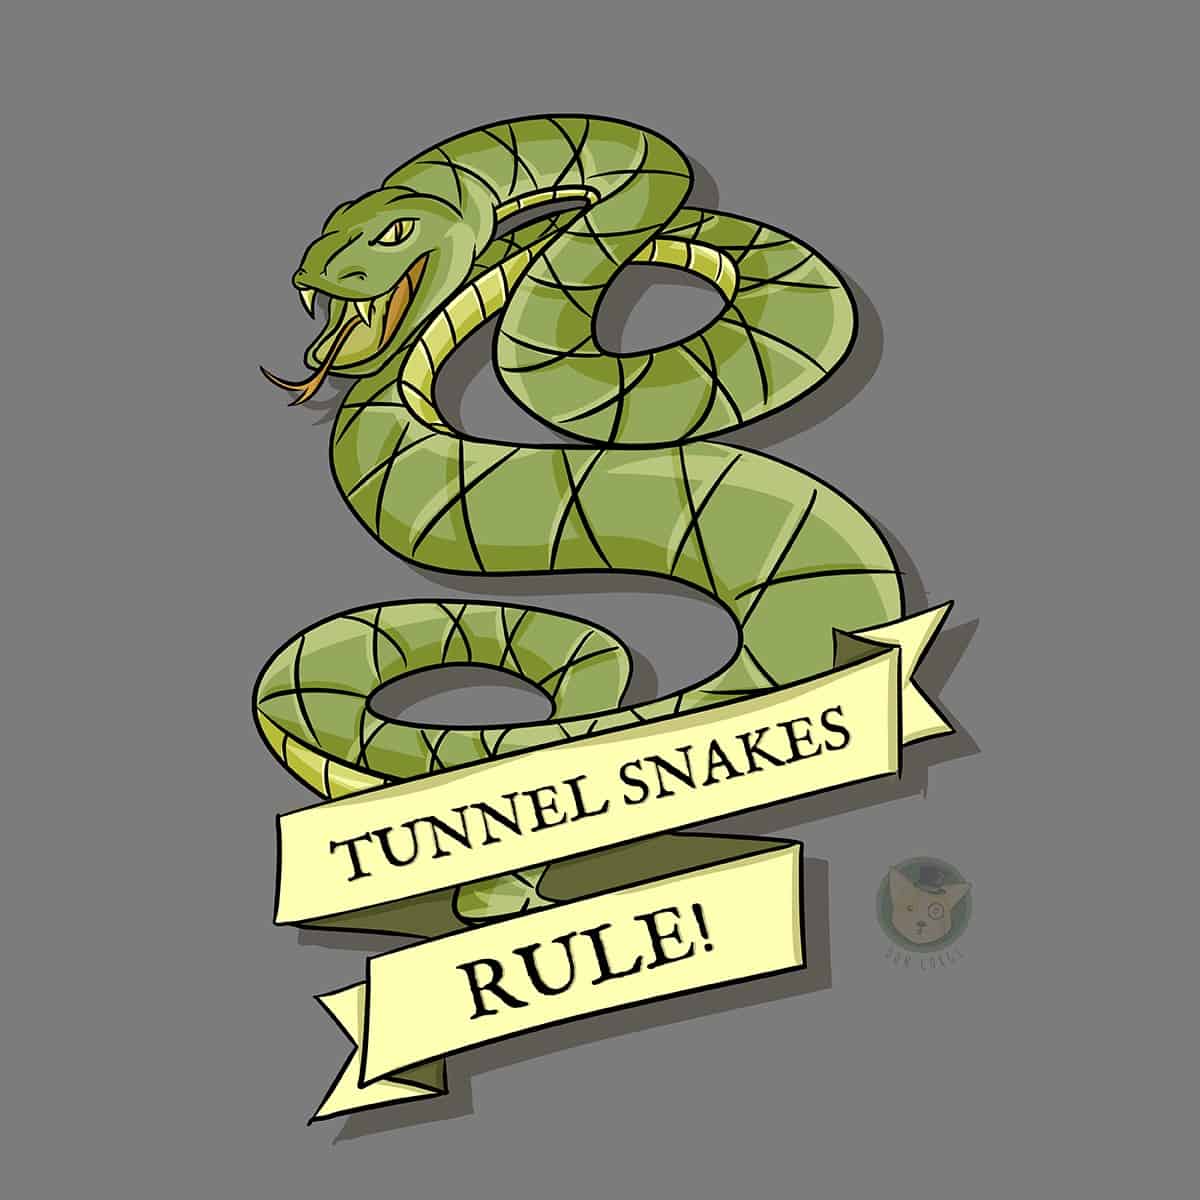 fallout 4, illustration, fallout 3, gaming, tunnel snakes rule